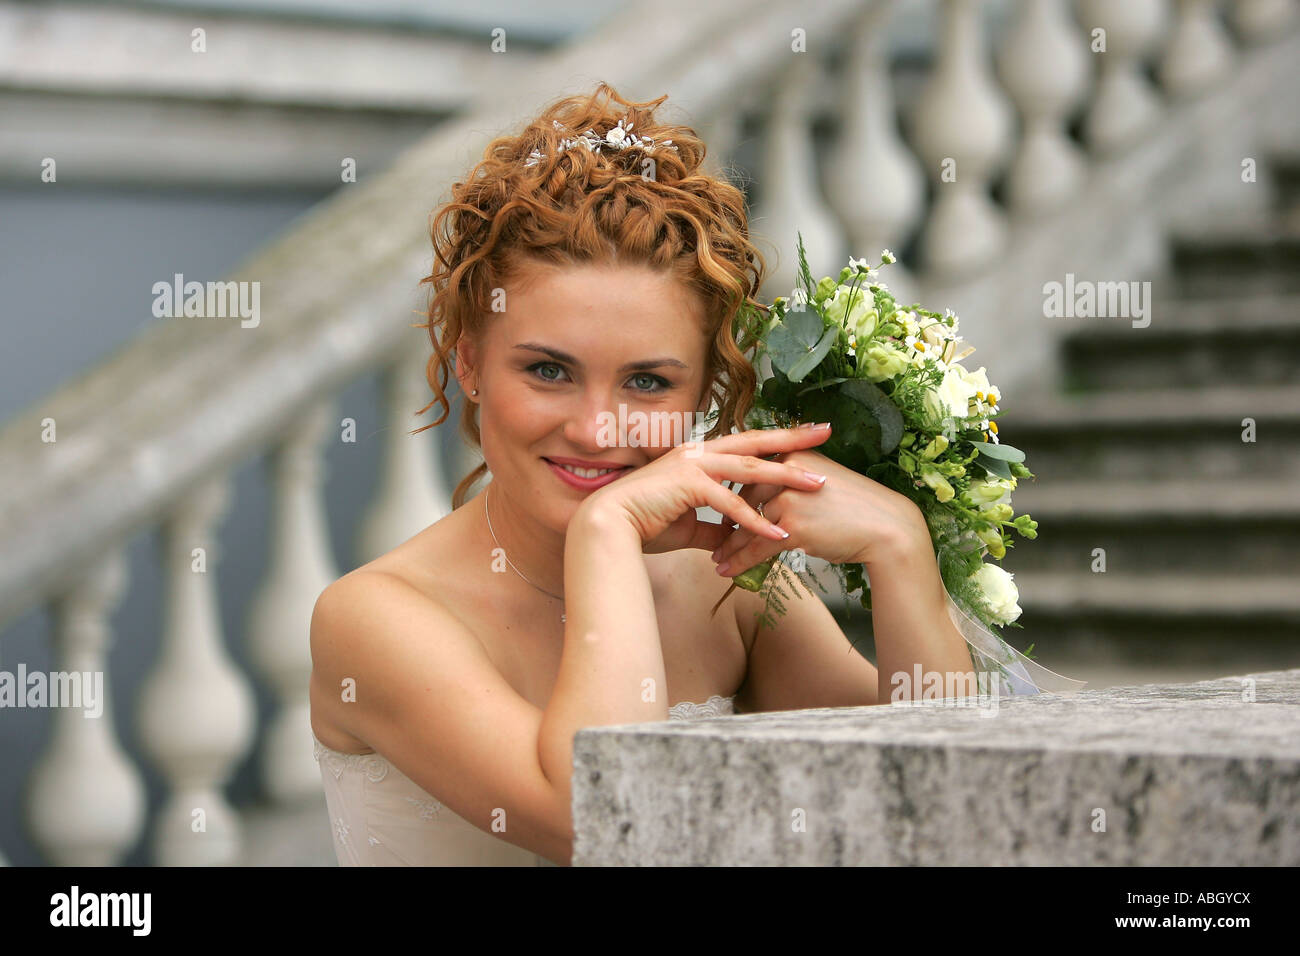 A portrait of a bride in a traditional white wedding dress pictured on her wedding day. She is stood in a half body portrait hol Stock Photo